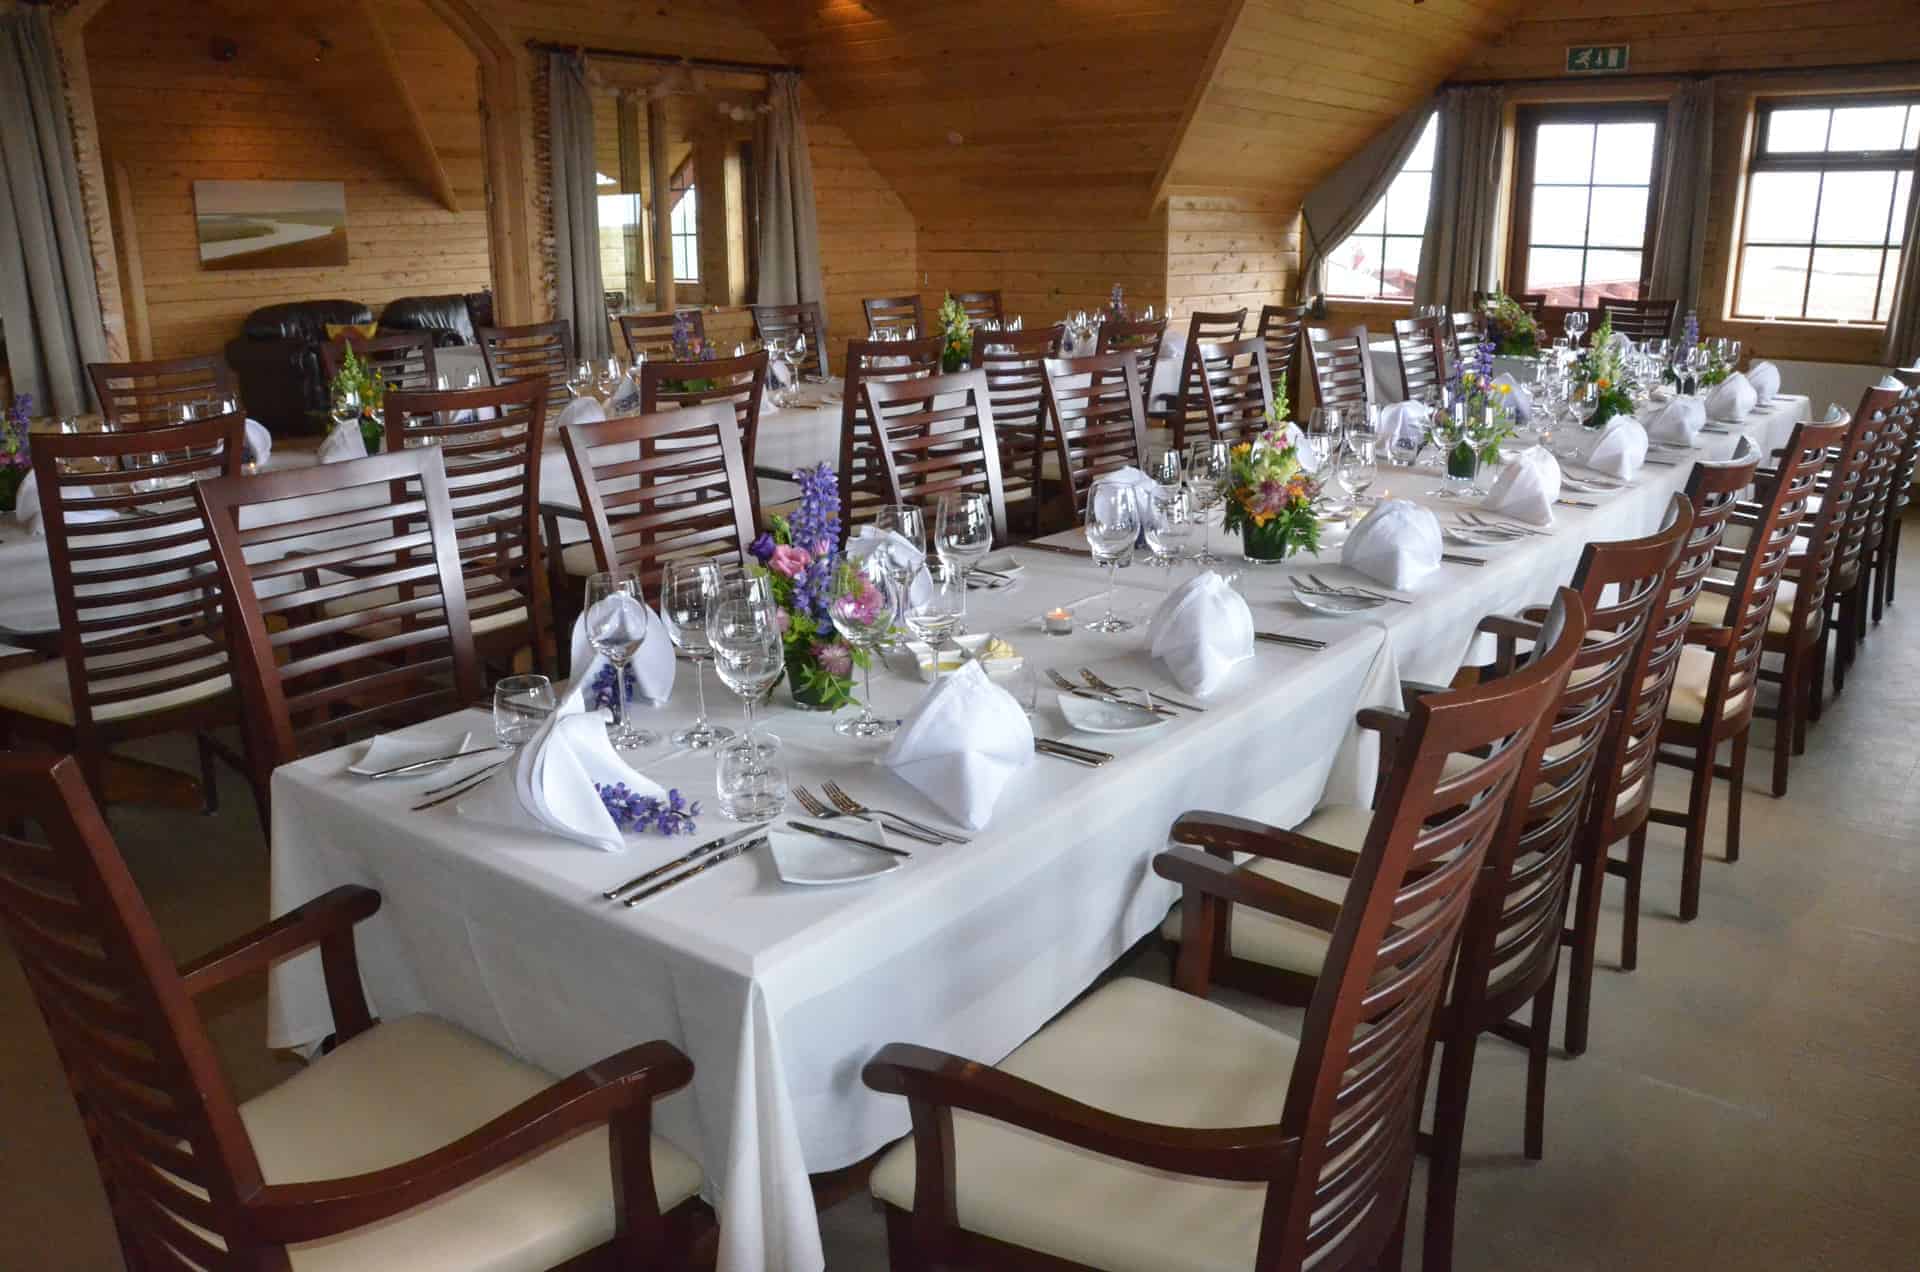 Hotel Rangá's River Hall set up for a wedding with two long tables and flower arrangements.